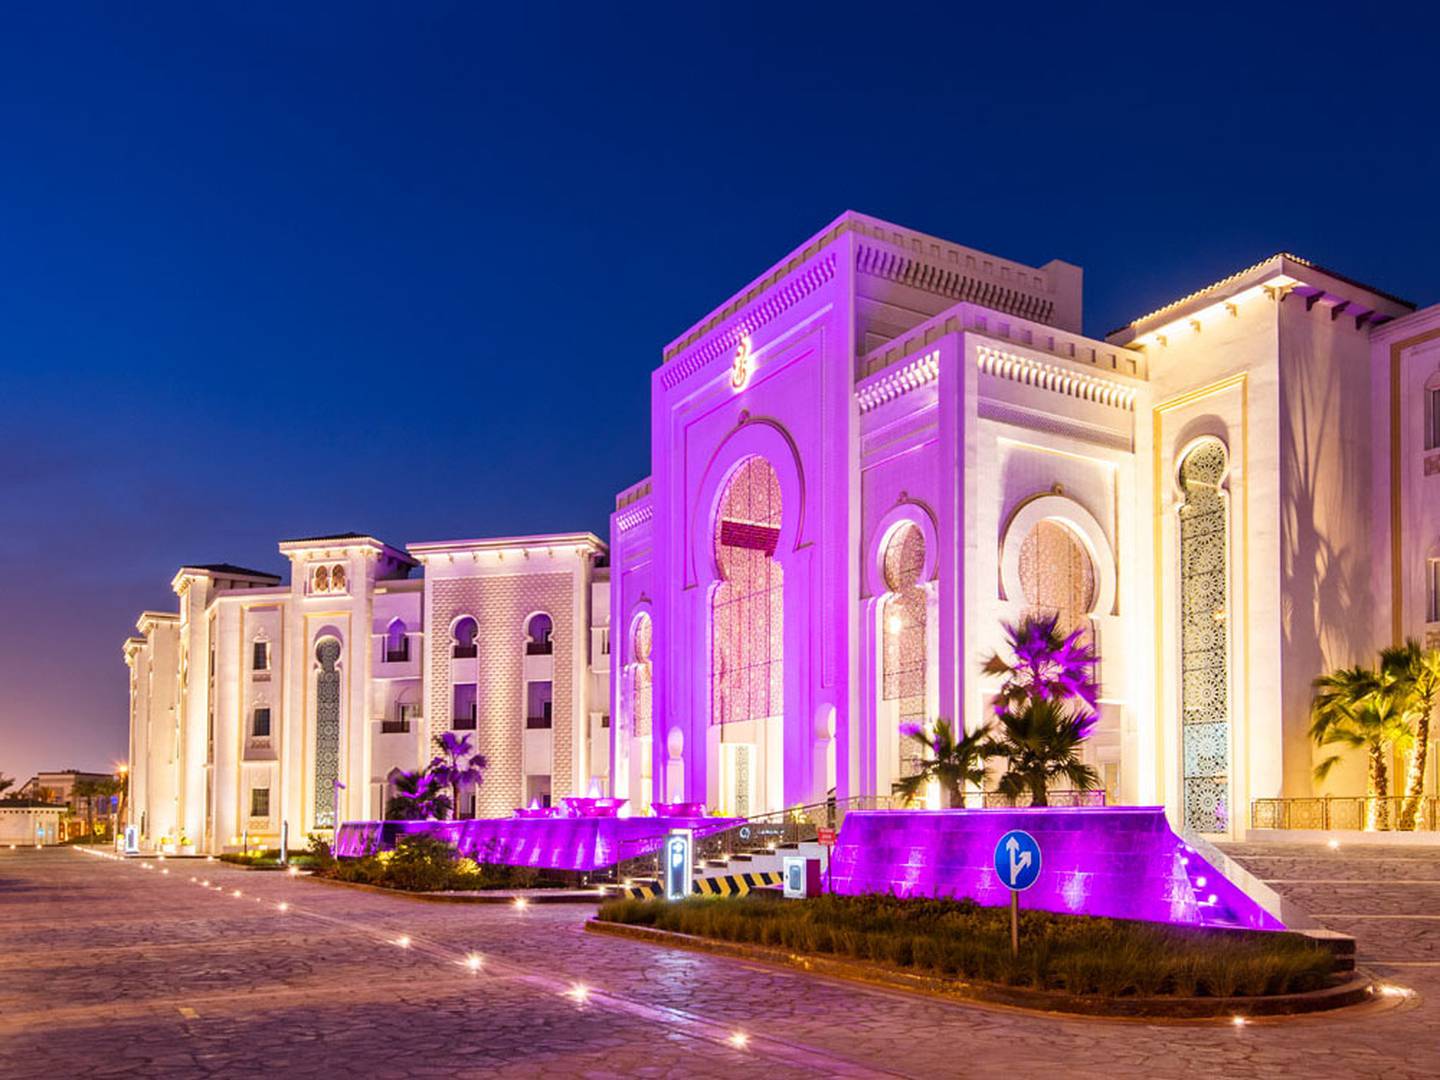 The team from Poland will be staying at the Ezdan Palace Hotel throughout the tournament. Photo: Ezdan Palace Hotel